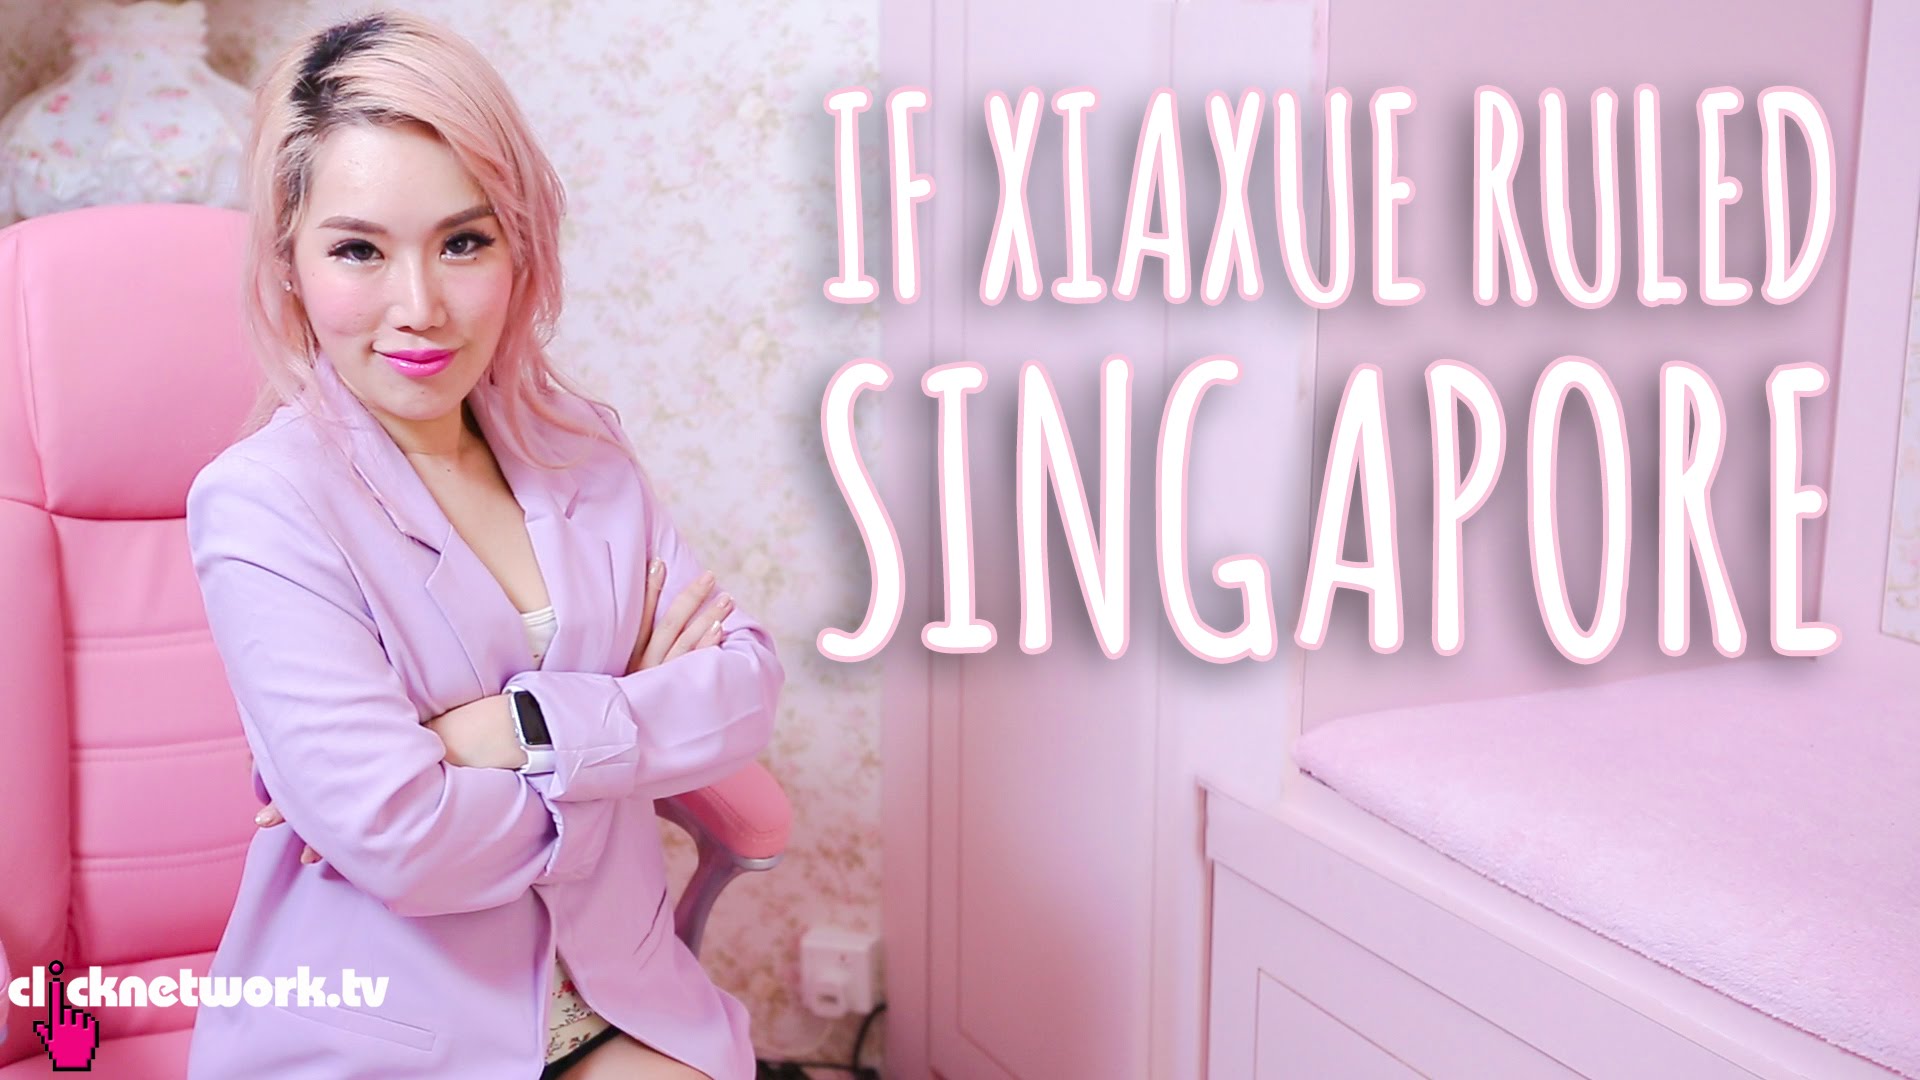 If Xiaxue ruled Singapore!